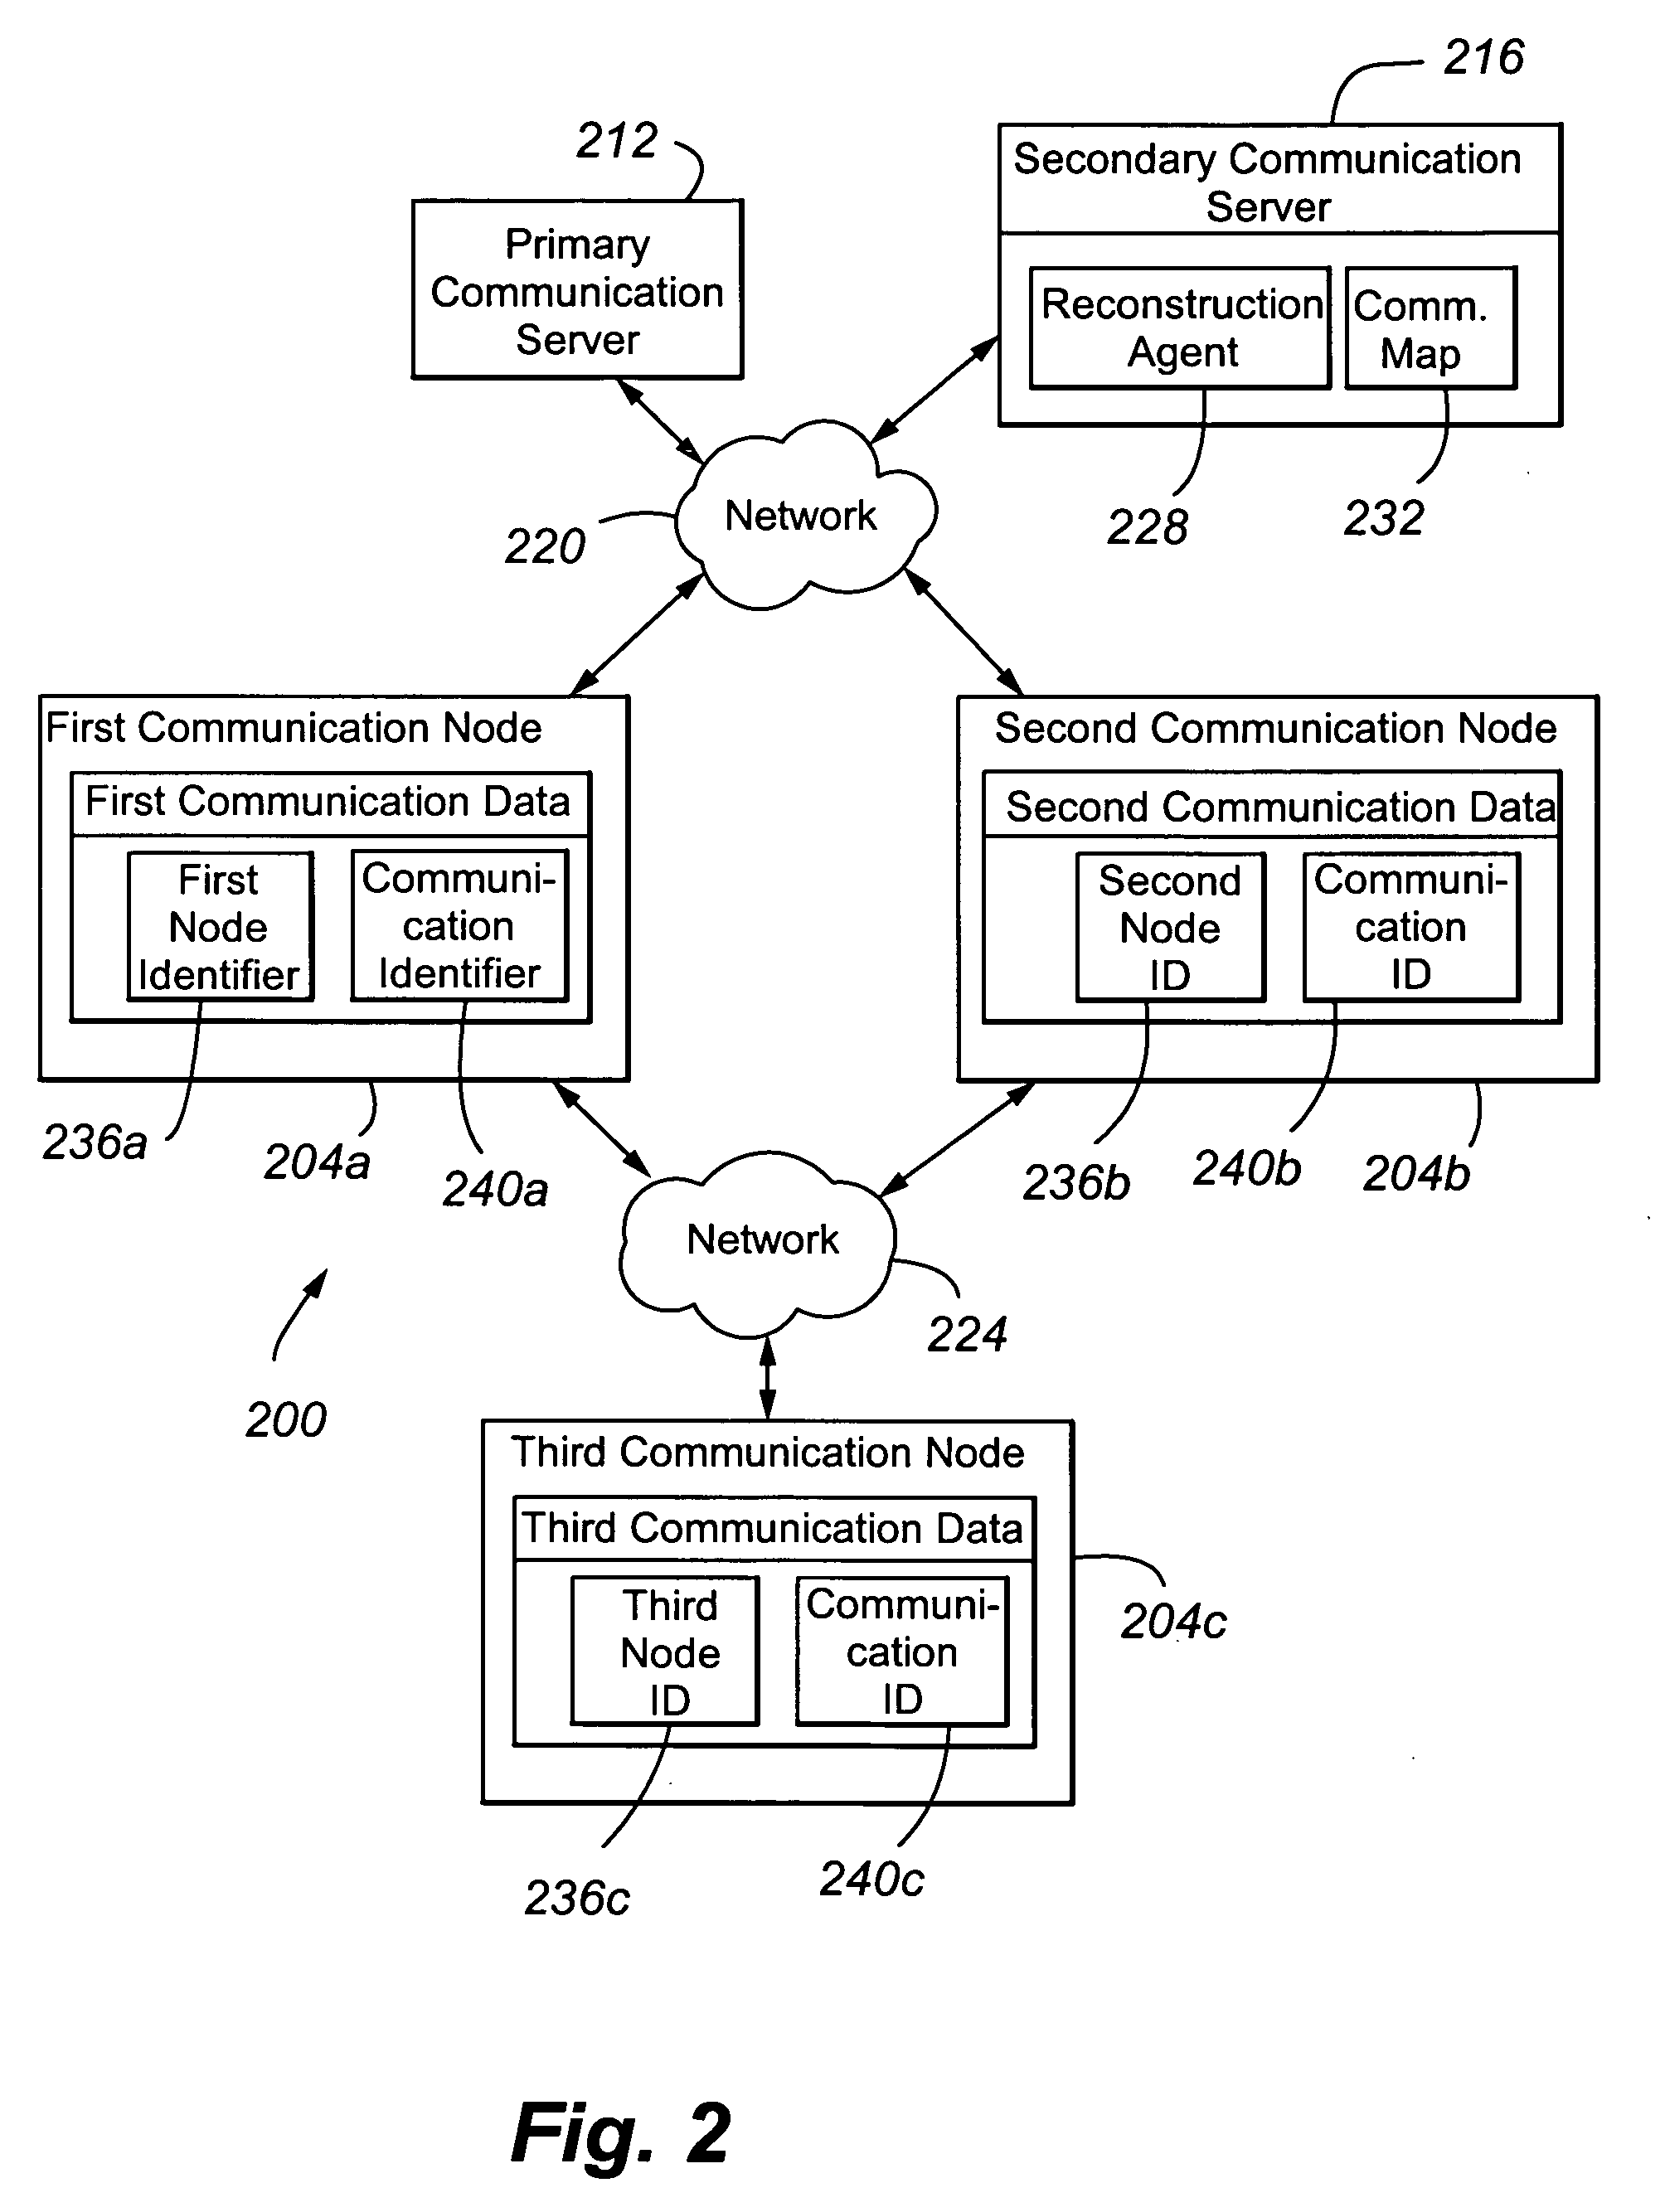 Method and apparatus for merging call components during call reconstruction